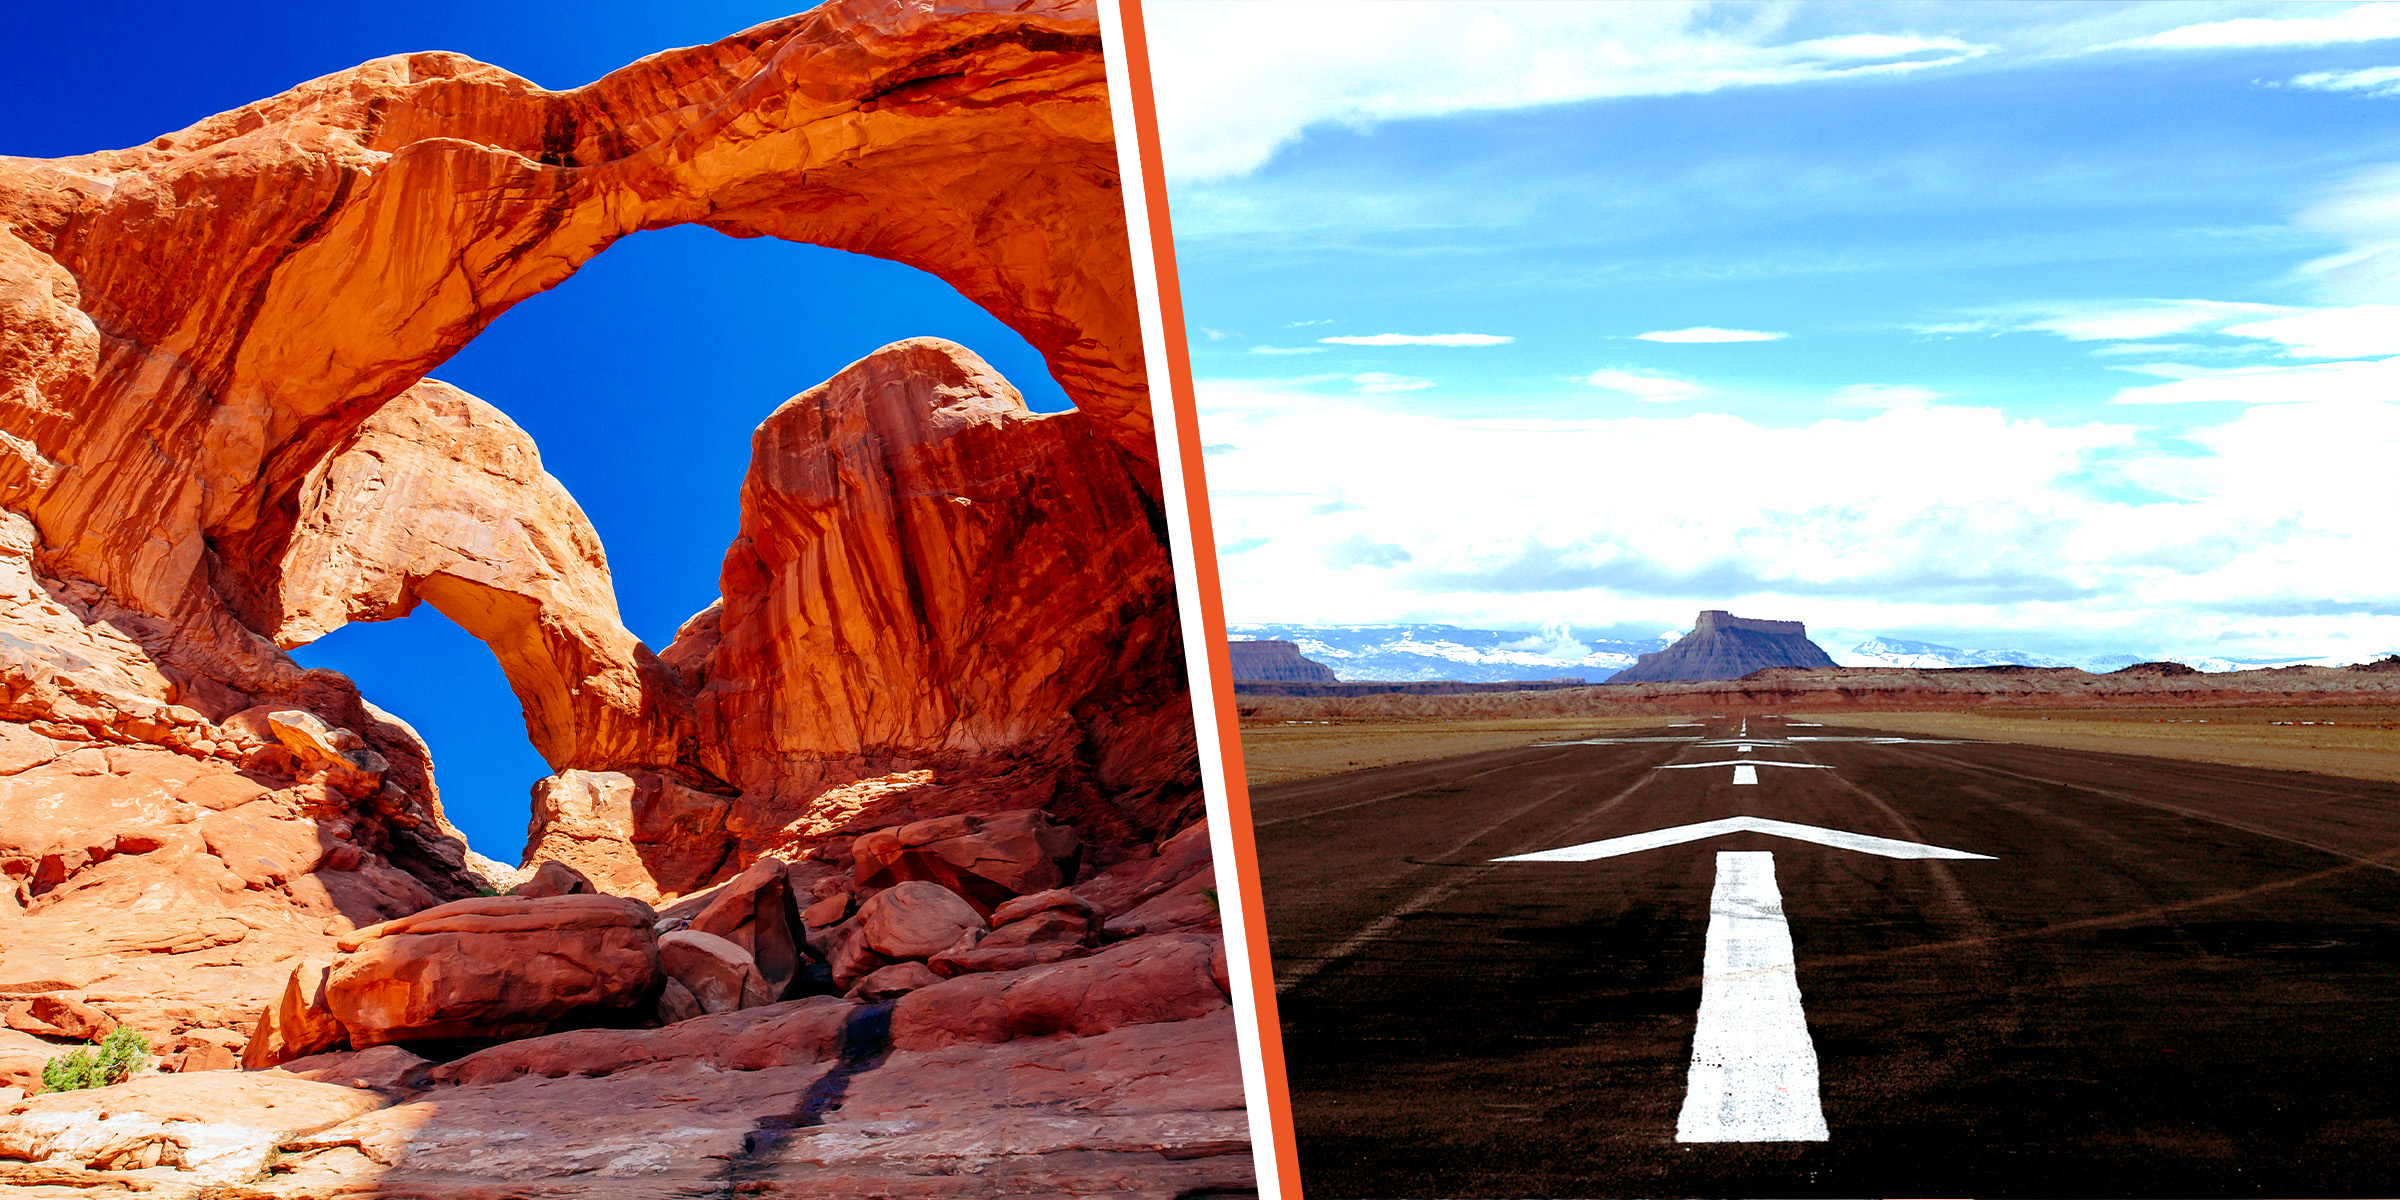 Arches National Park | Canyonlands Field Airport | Source: Getty Images | Shutterstock